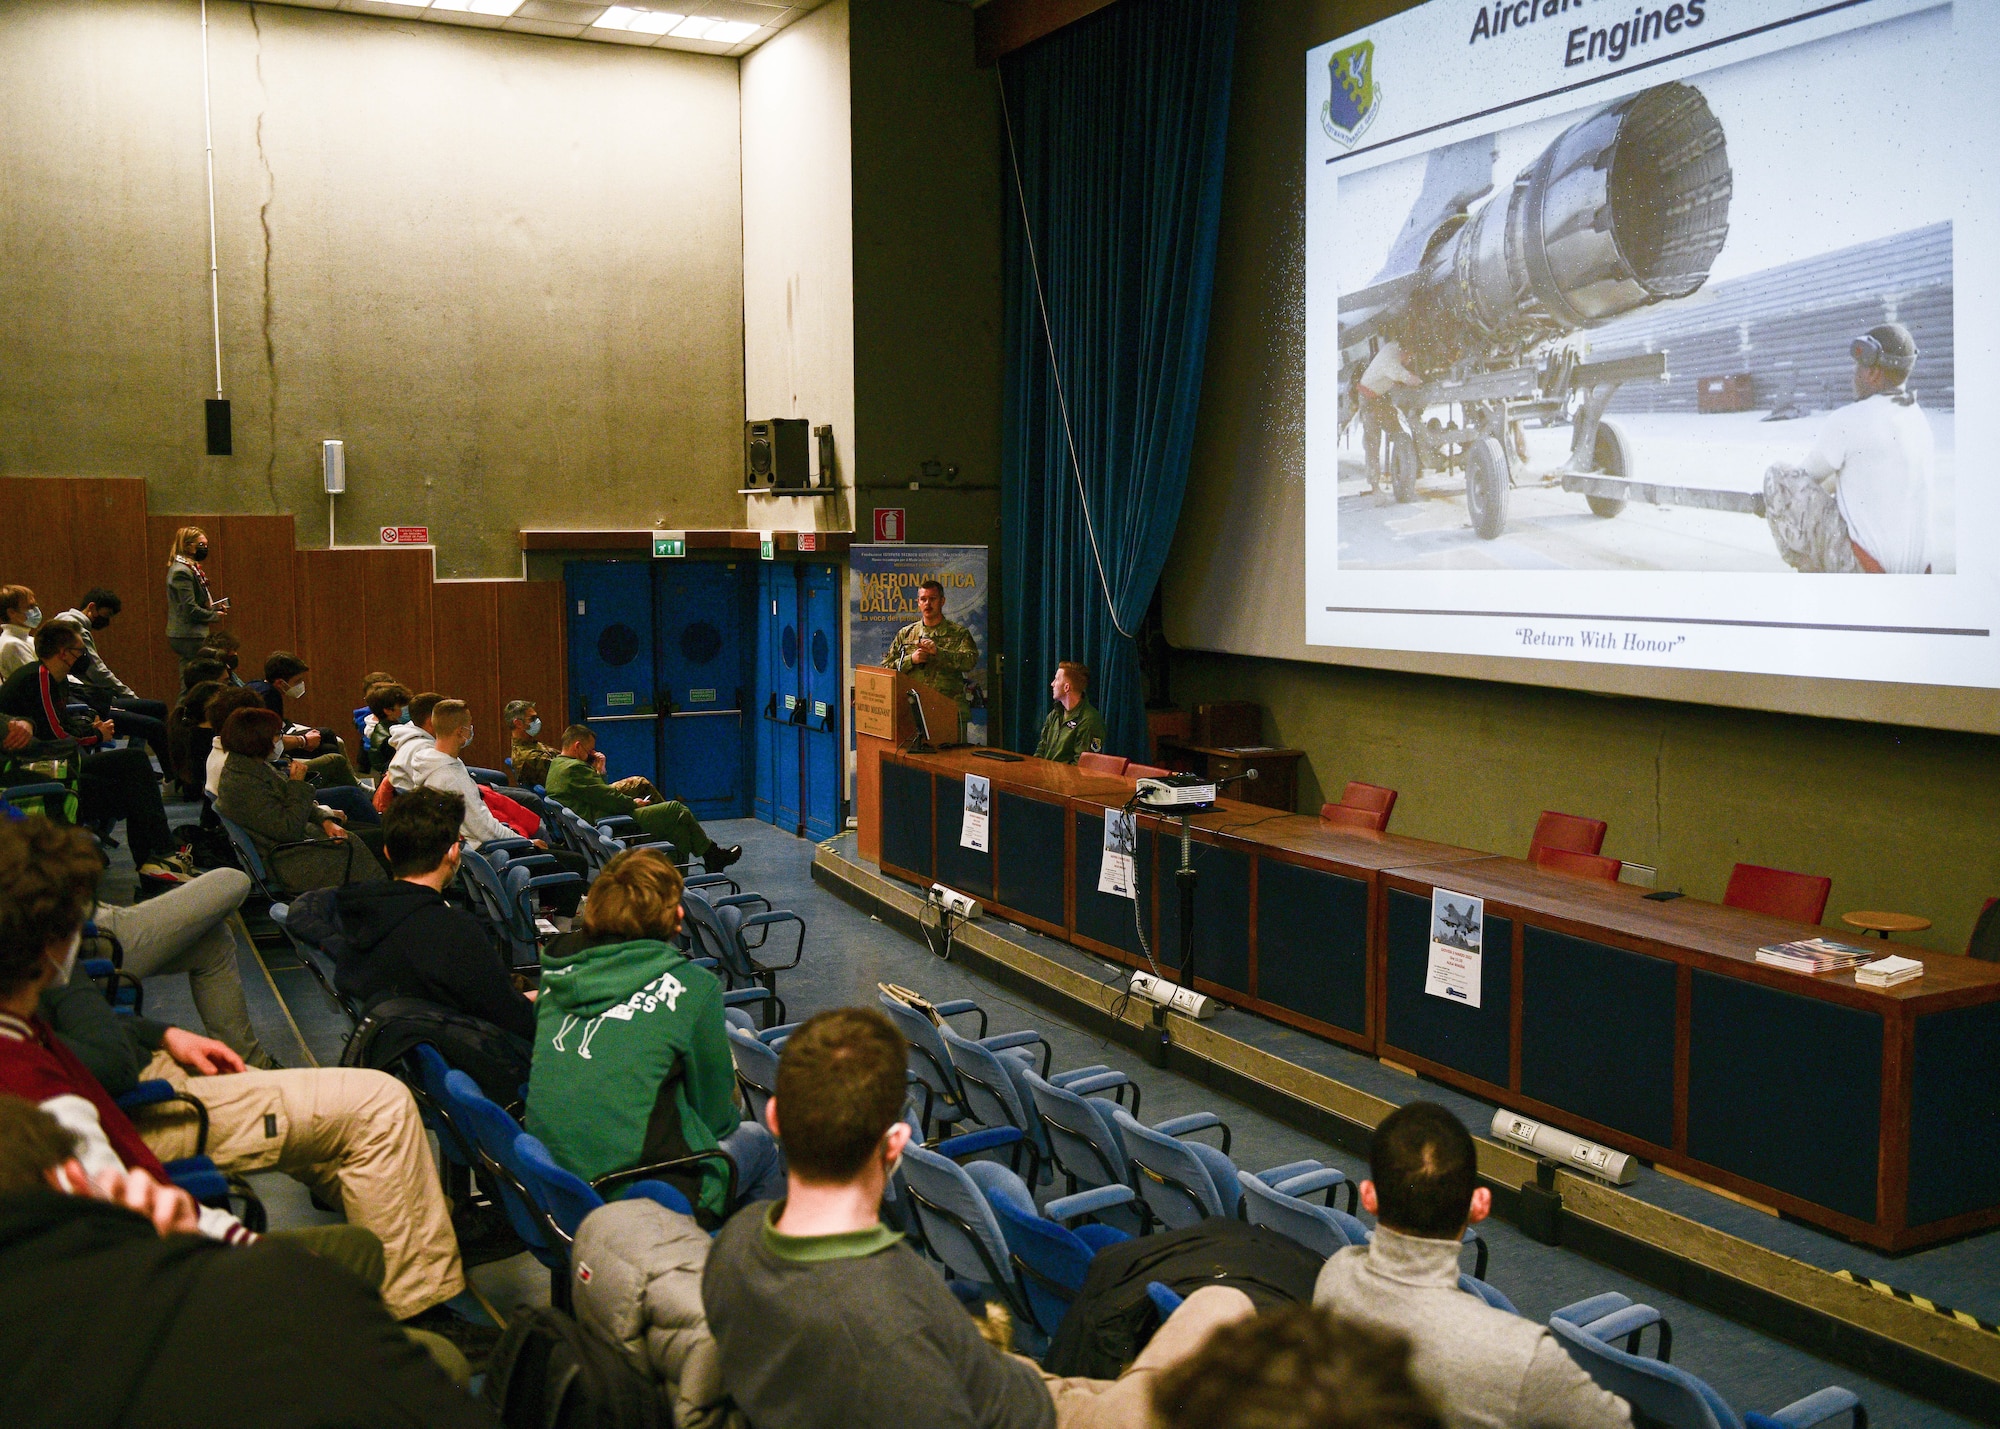 Tech. Sgt. Hunter Newell, 31st Maintenance Group Quality Assurance inspector, speaks to a group of aeronautical high school students at the Malignani Aeronautical Institute in Udine, Italy, March 3, 2022. A pilot and maintainer from the 31st Fighter Wing had the opportunity to share their career experiences with aeronautical high school students and engage with the future generation of pilots. (U.S. Air Force photo by Senior Airman Brooke Moeder)